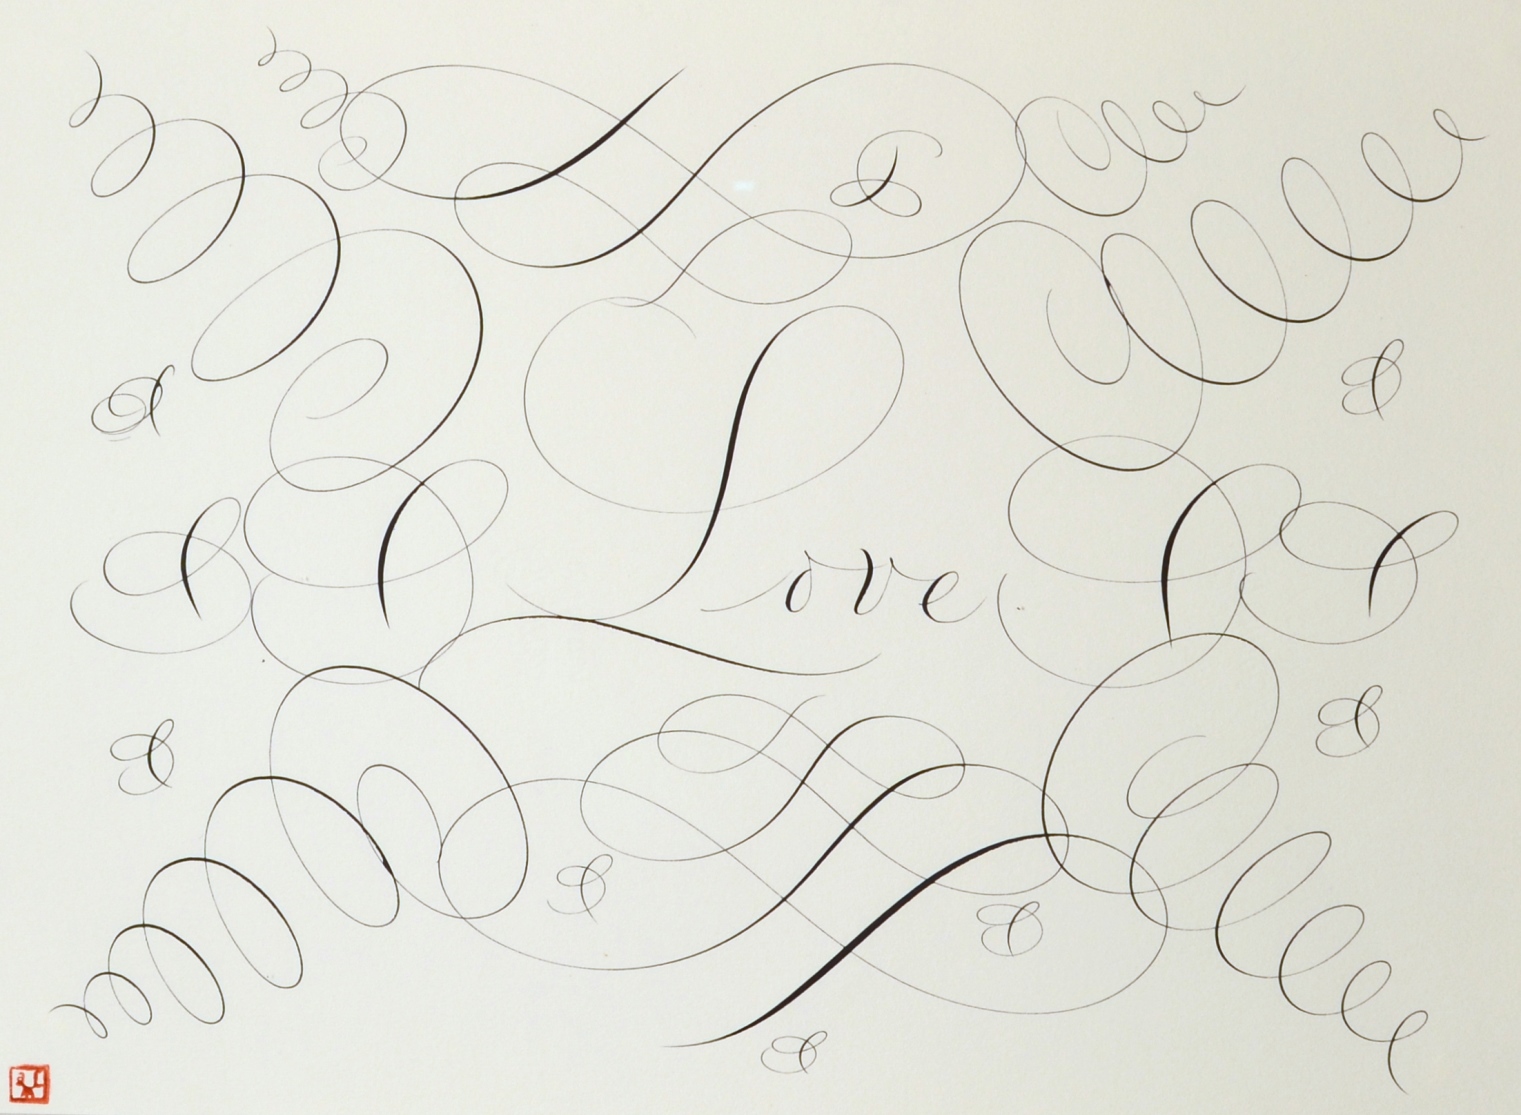 "Calligraphic Drawing, Love"